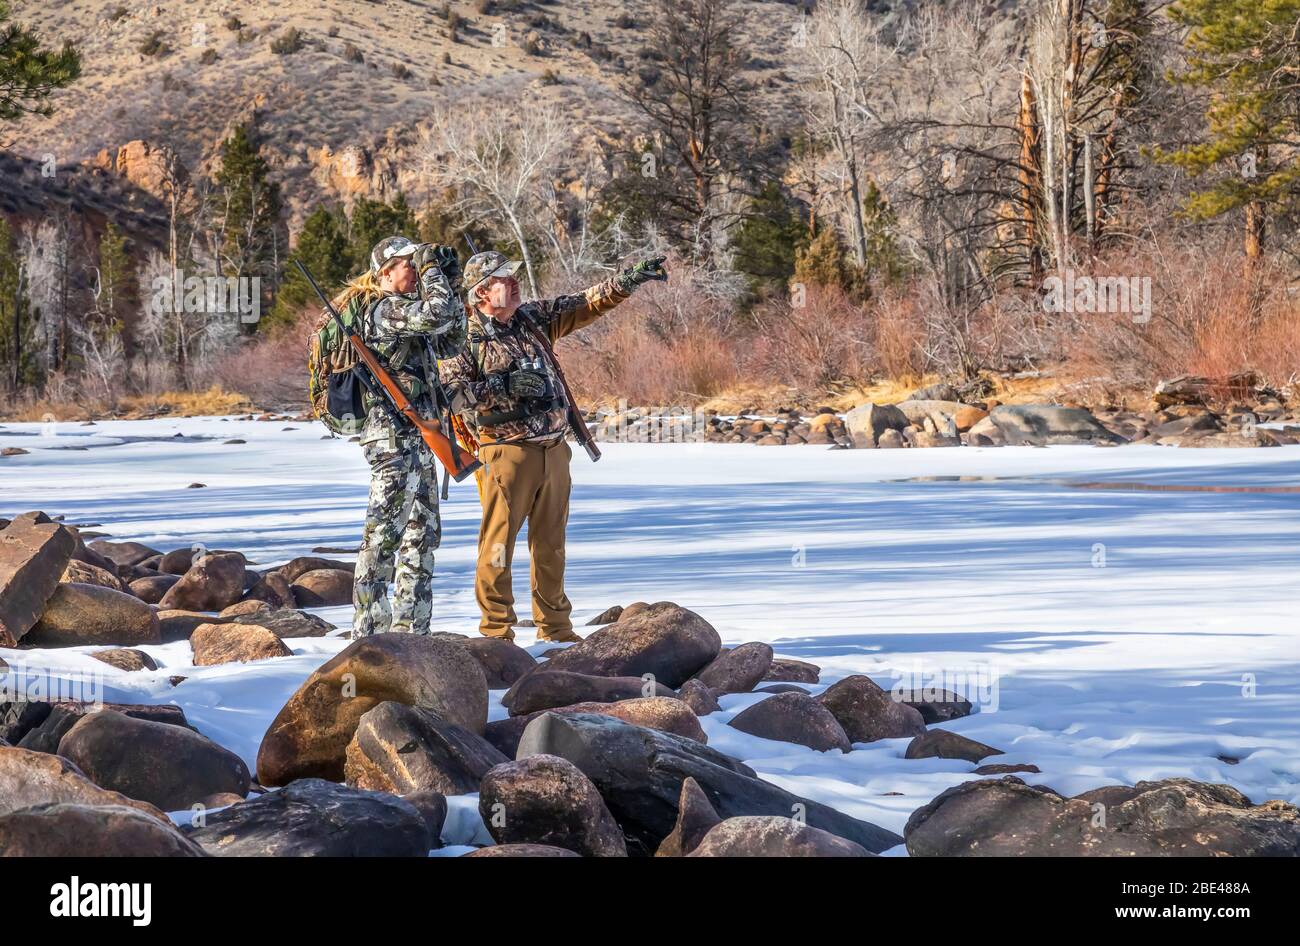 Hunters with camouflage clothing and rifle looking out with binoculars; Denver, Colorado, United States of America Stock Photo